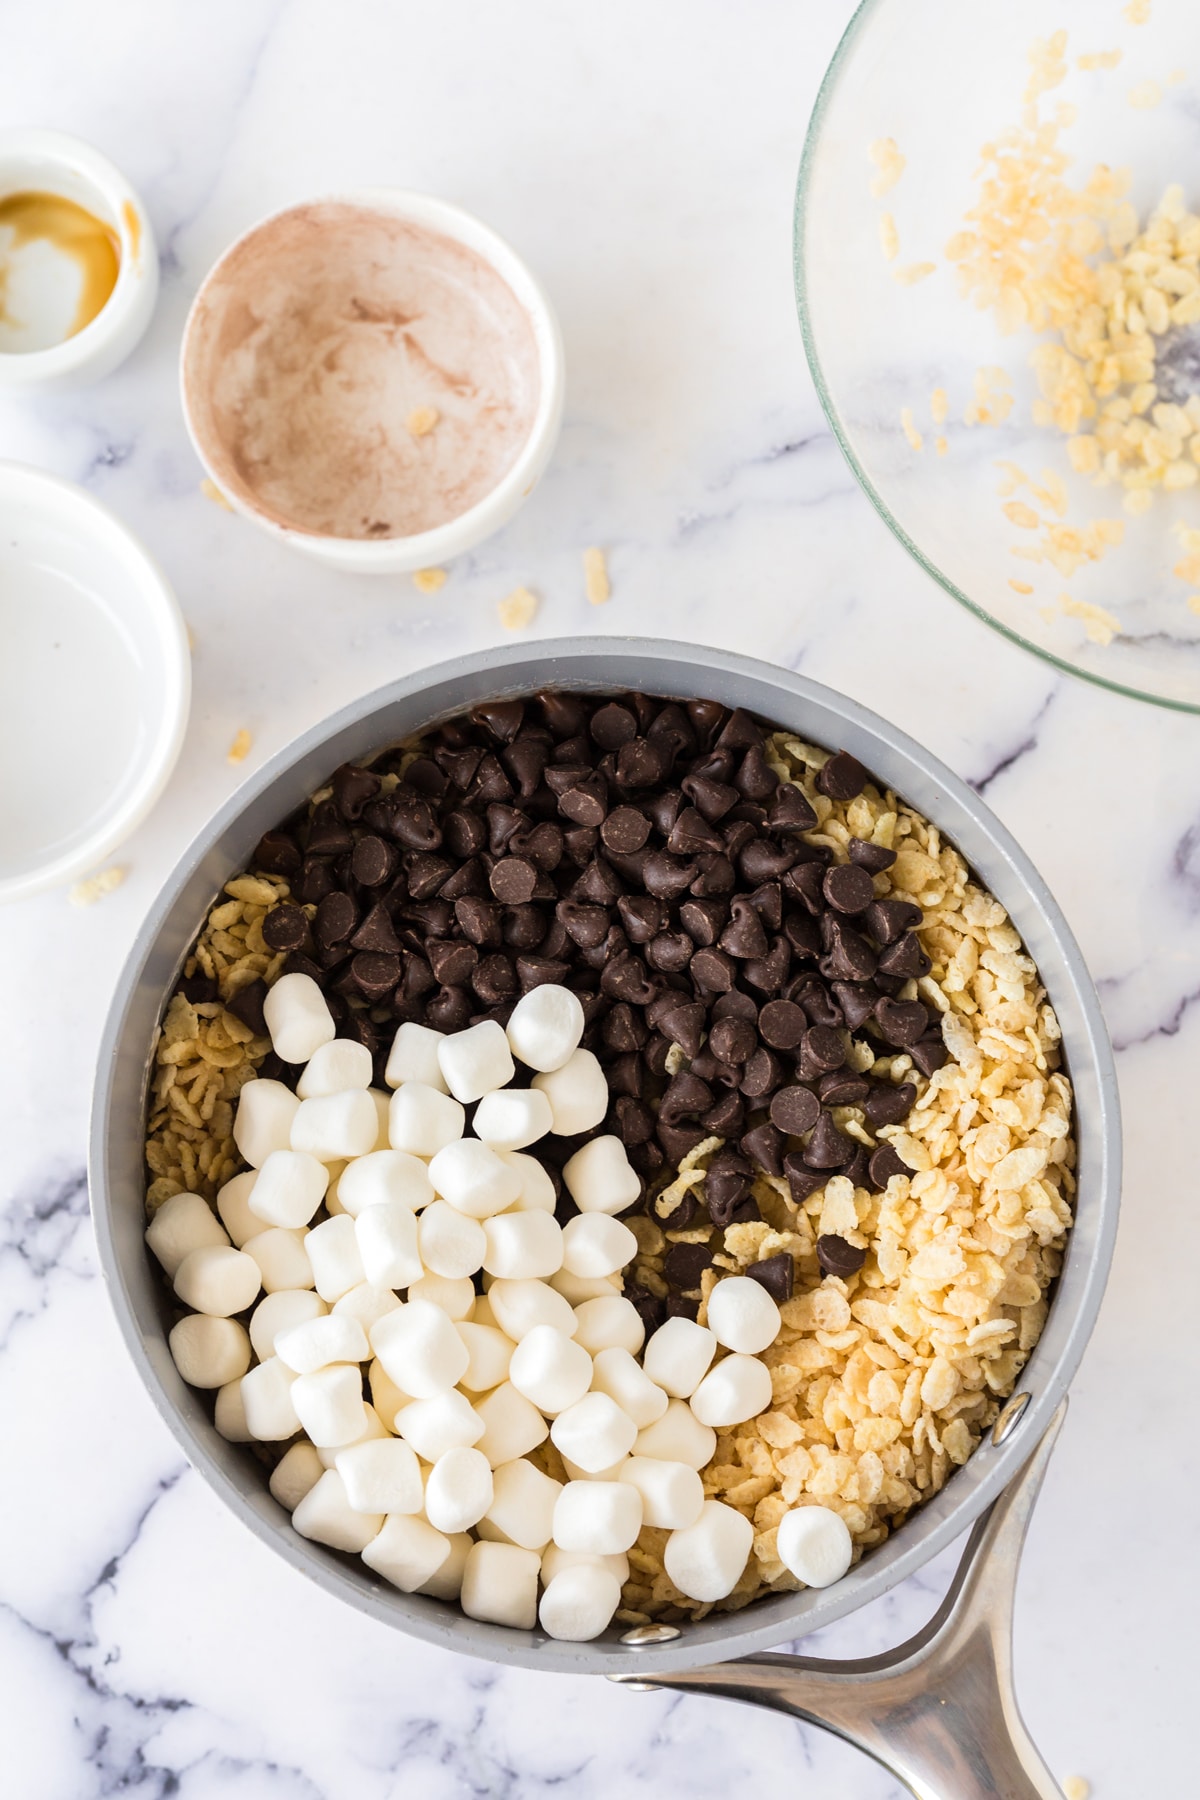 A pan with marshmallows, chocolate chips, rice krispies cereal, and other ingredients combined to make Hot Chocolate Rice Krispy Treats